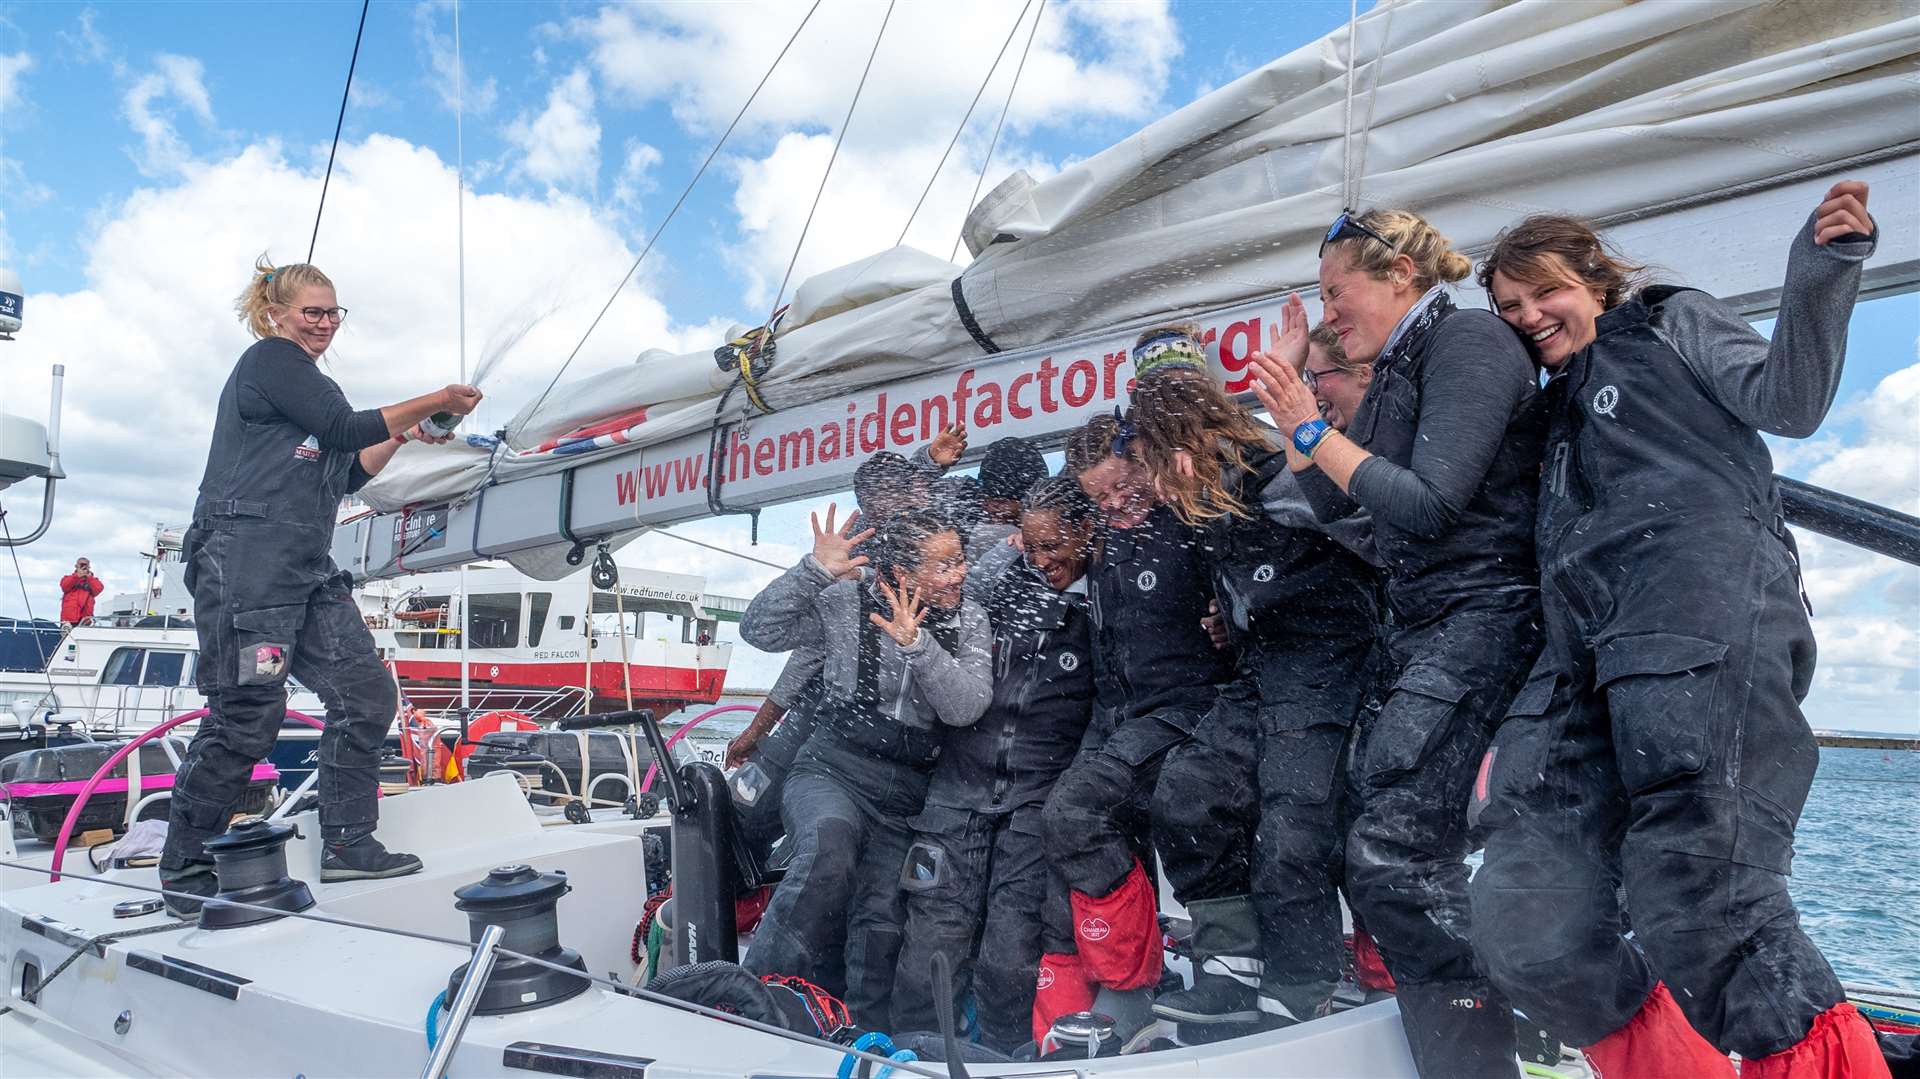 The crew celebrate their arrival at the Isle of Wight (Kaia Bint Savage/The Maiden Factor/PA)